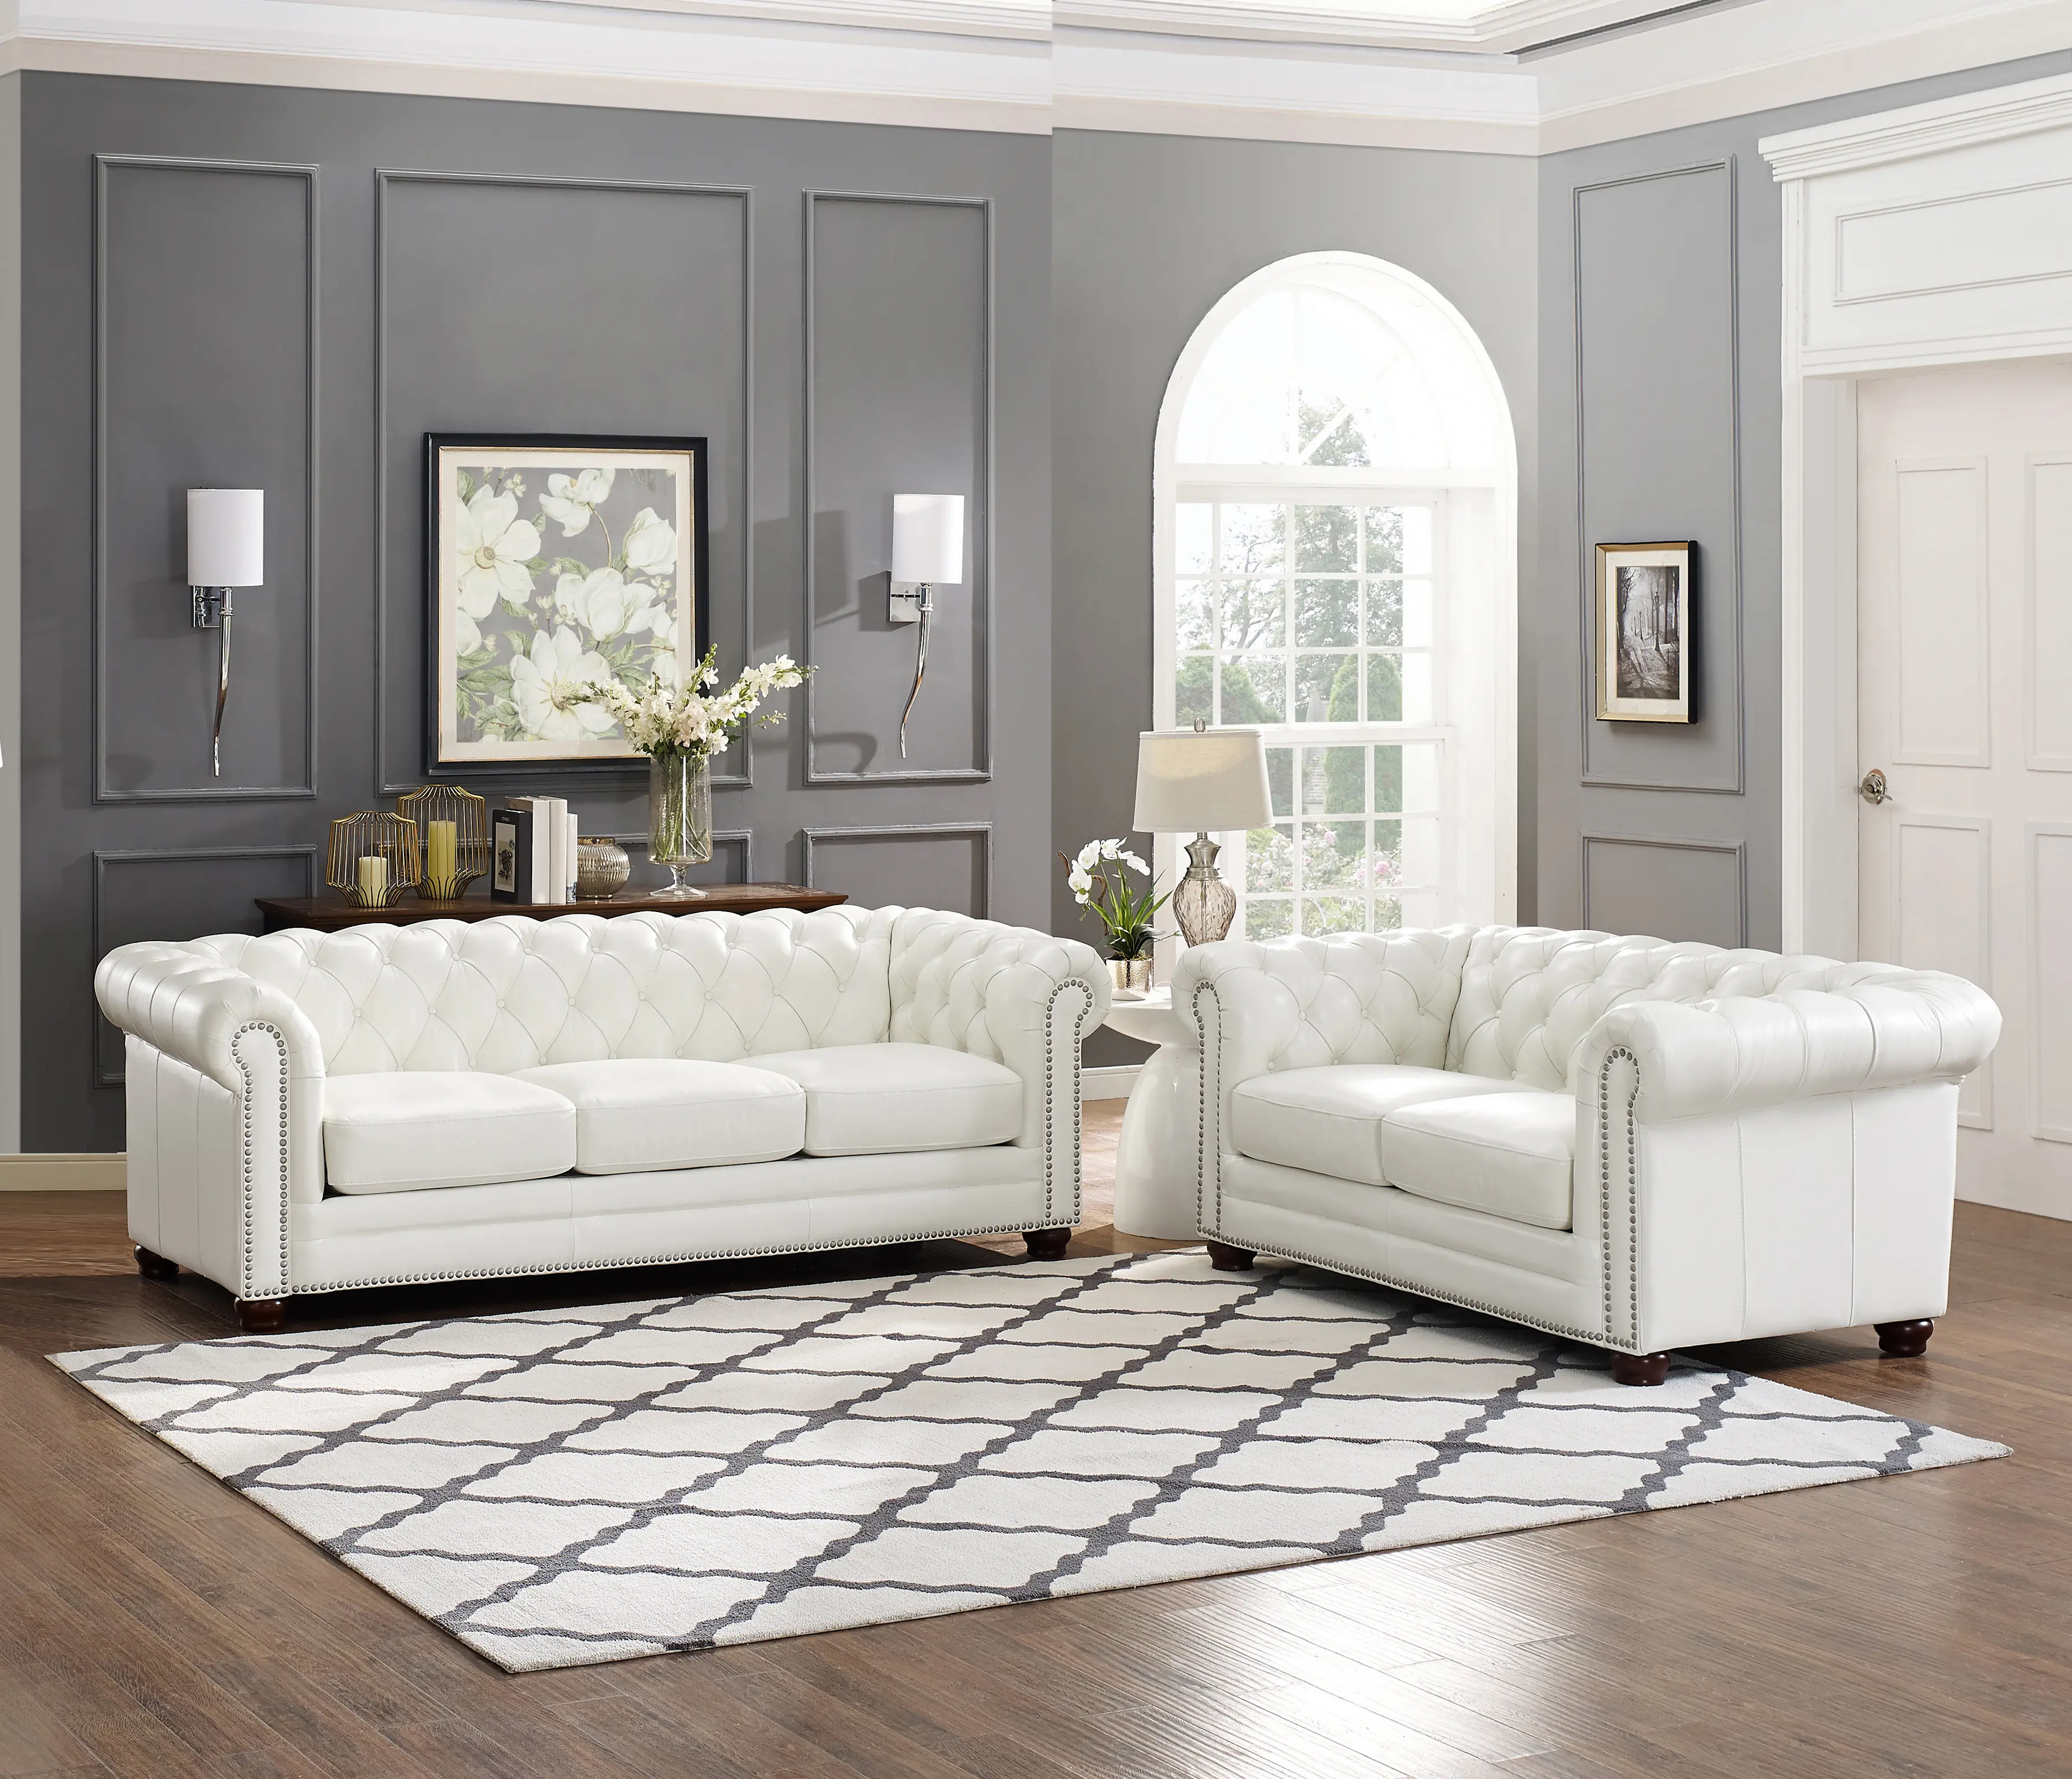 Kennedy White Leather 2 Piece Living Room Set - Sofa & Loveseat